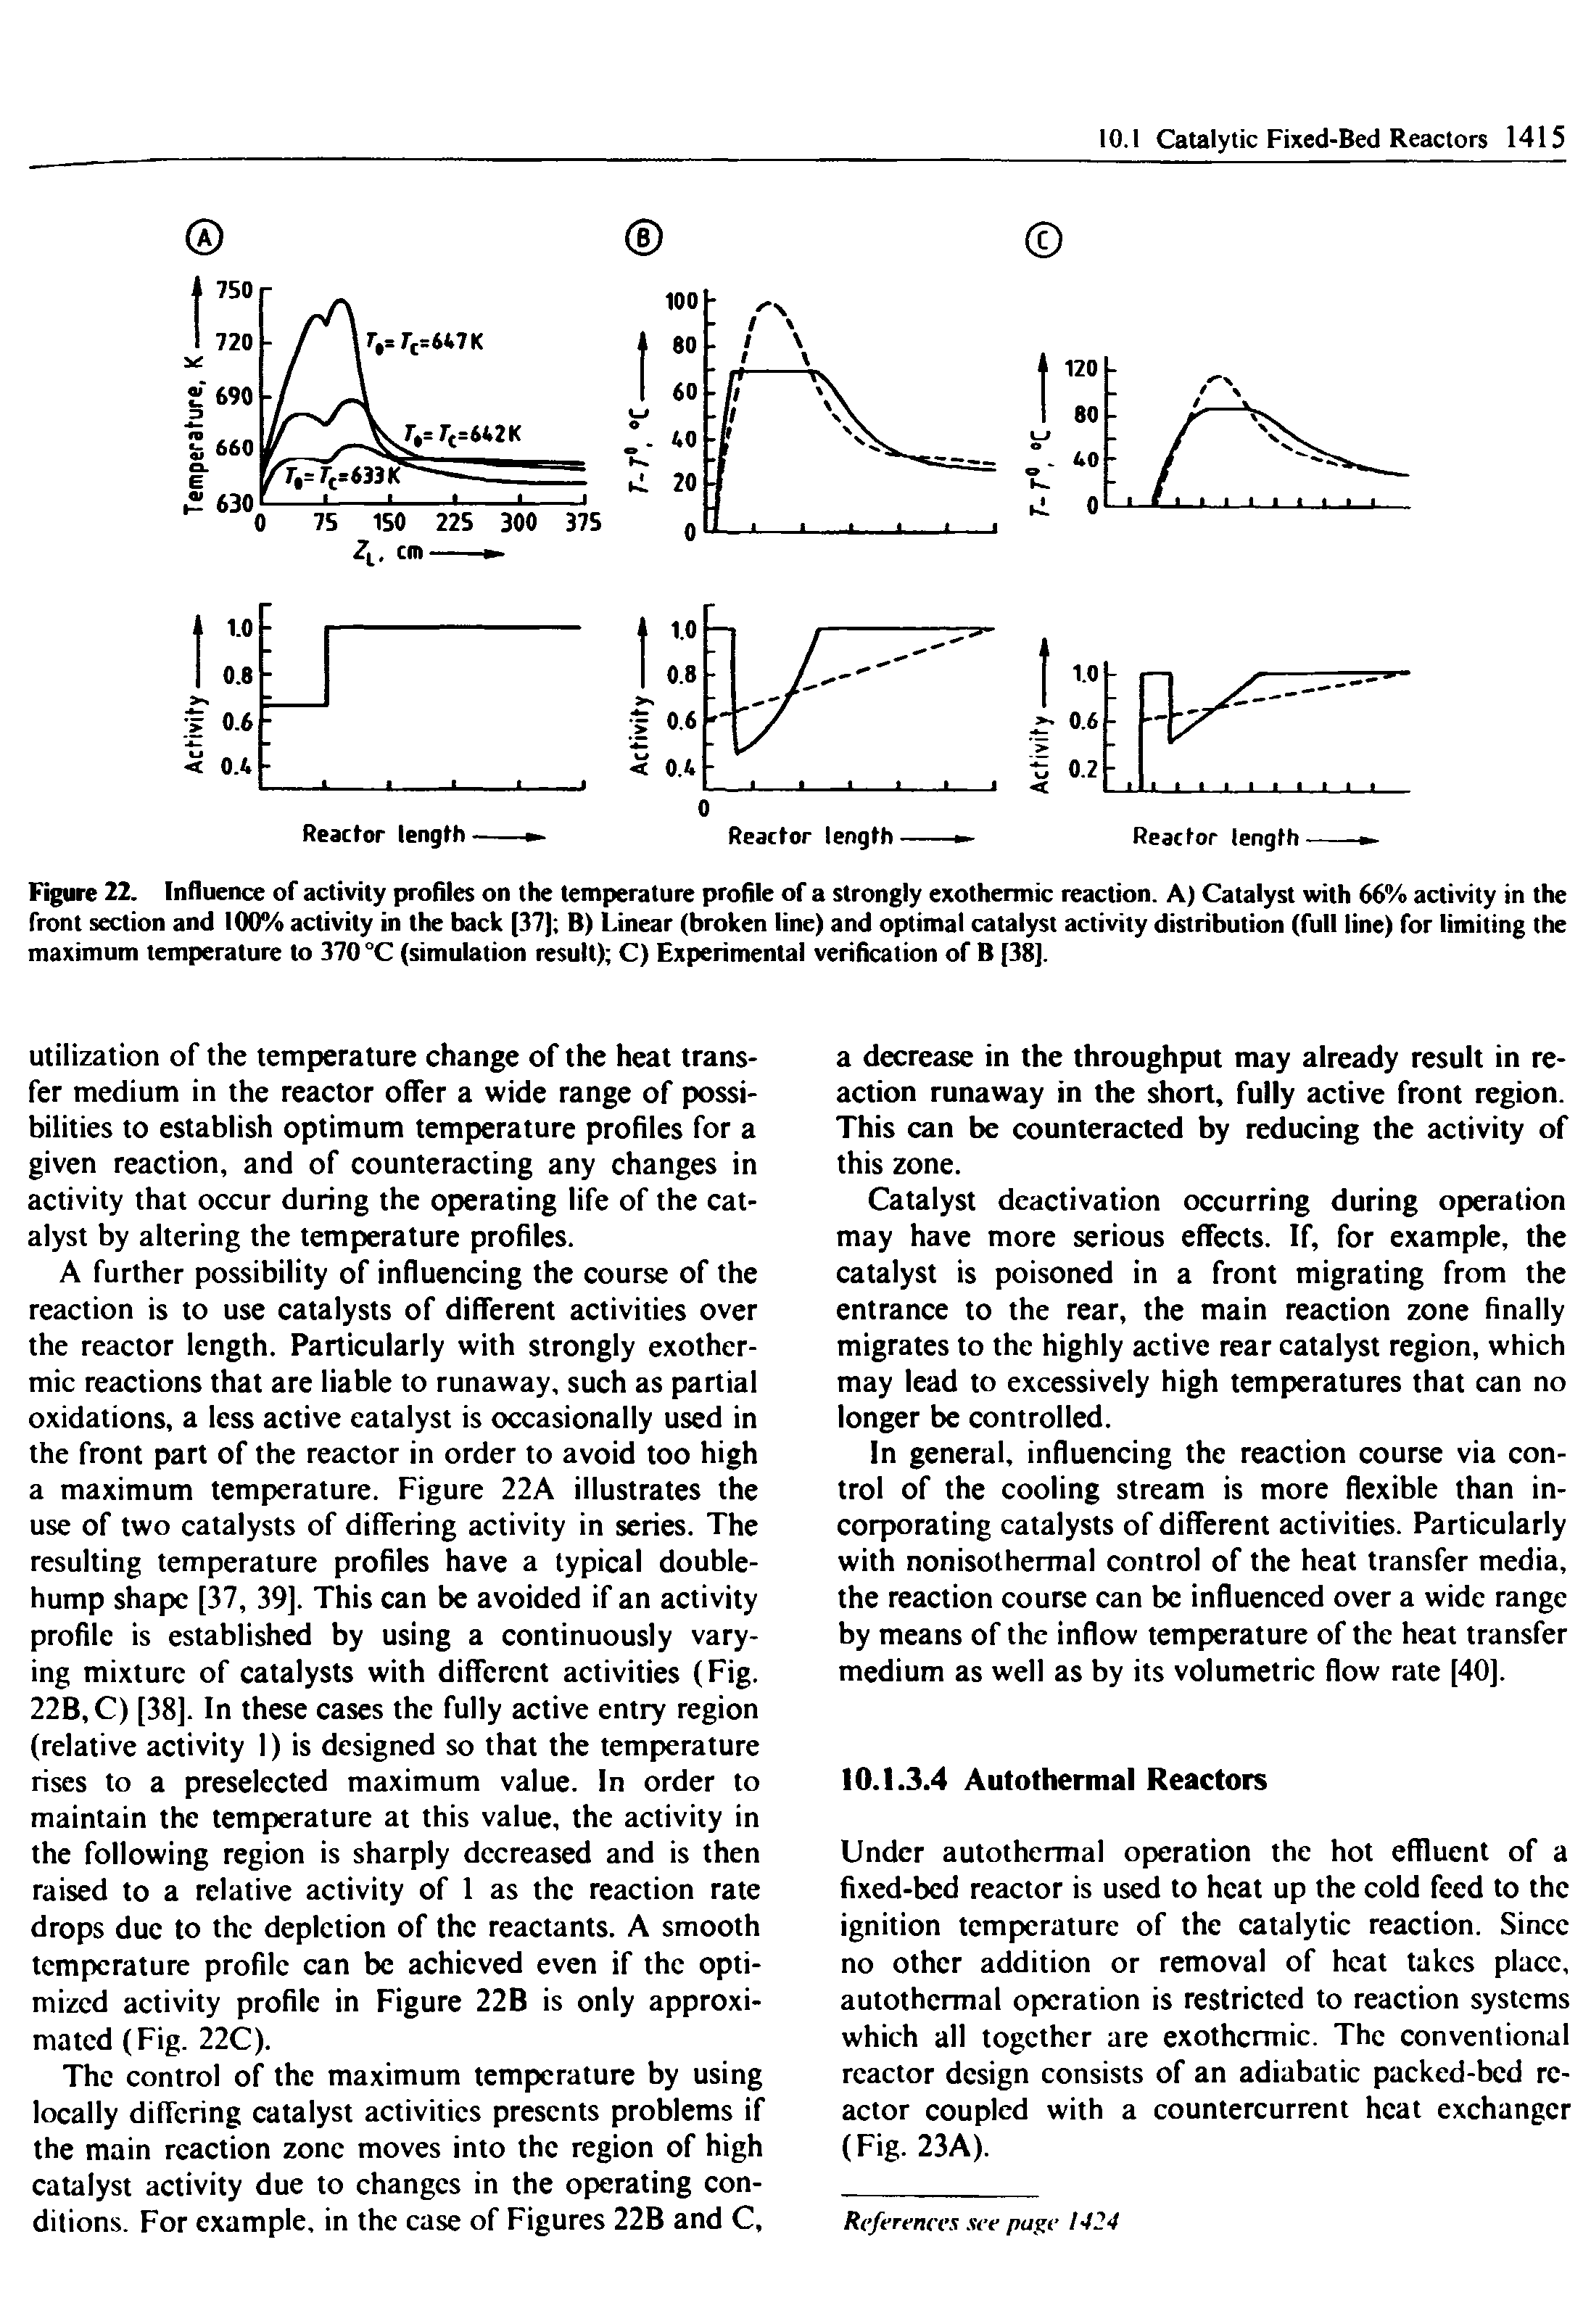 Figure 22. Influence of activity profiles on the temperature profile of a strongly exothermic reaction. A) Catalyst with 66% activity in the front section and 100% activity in the back [37] B) Linear (broken line) and optimal catalyst activity distribution (full line) for limiting the maximum temperature to 370 °C (simulation result) C) Experimental verification of B [38].